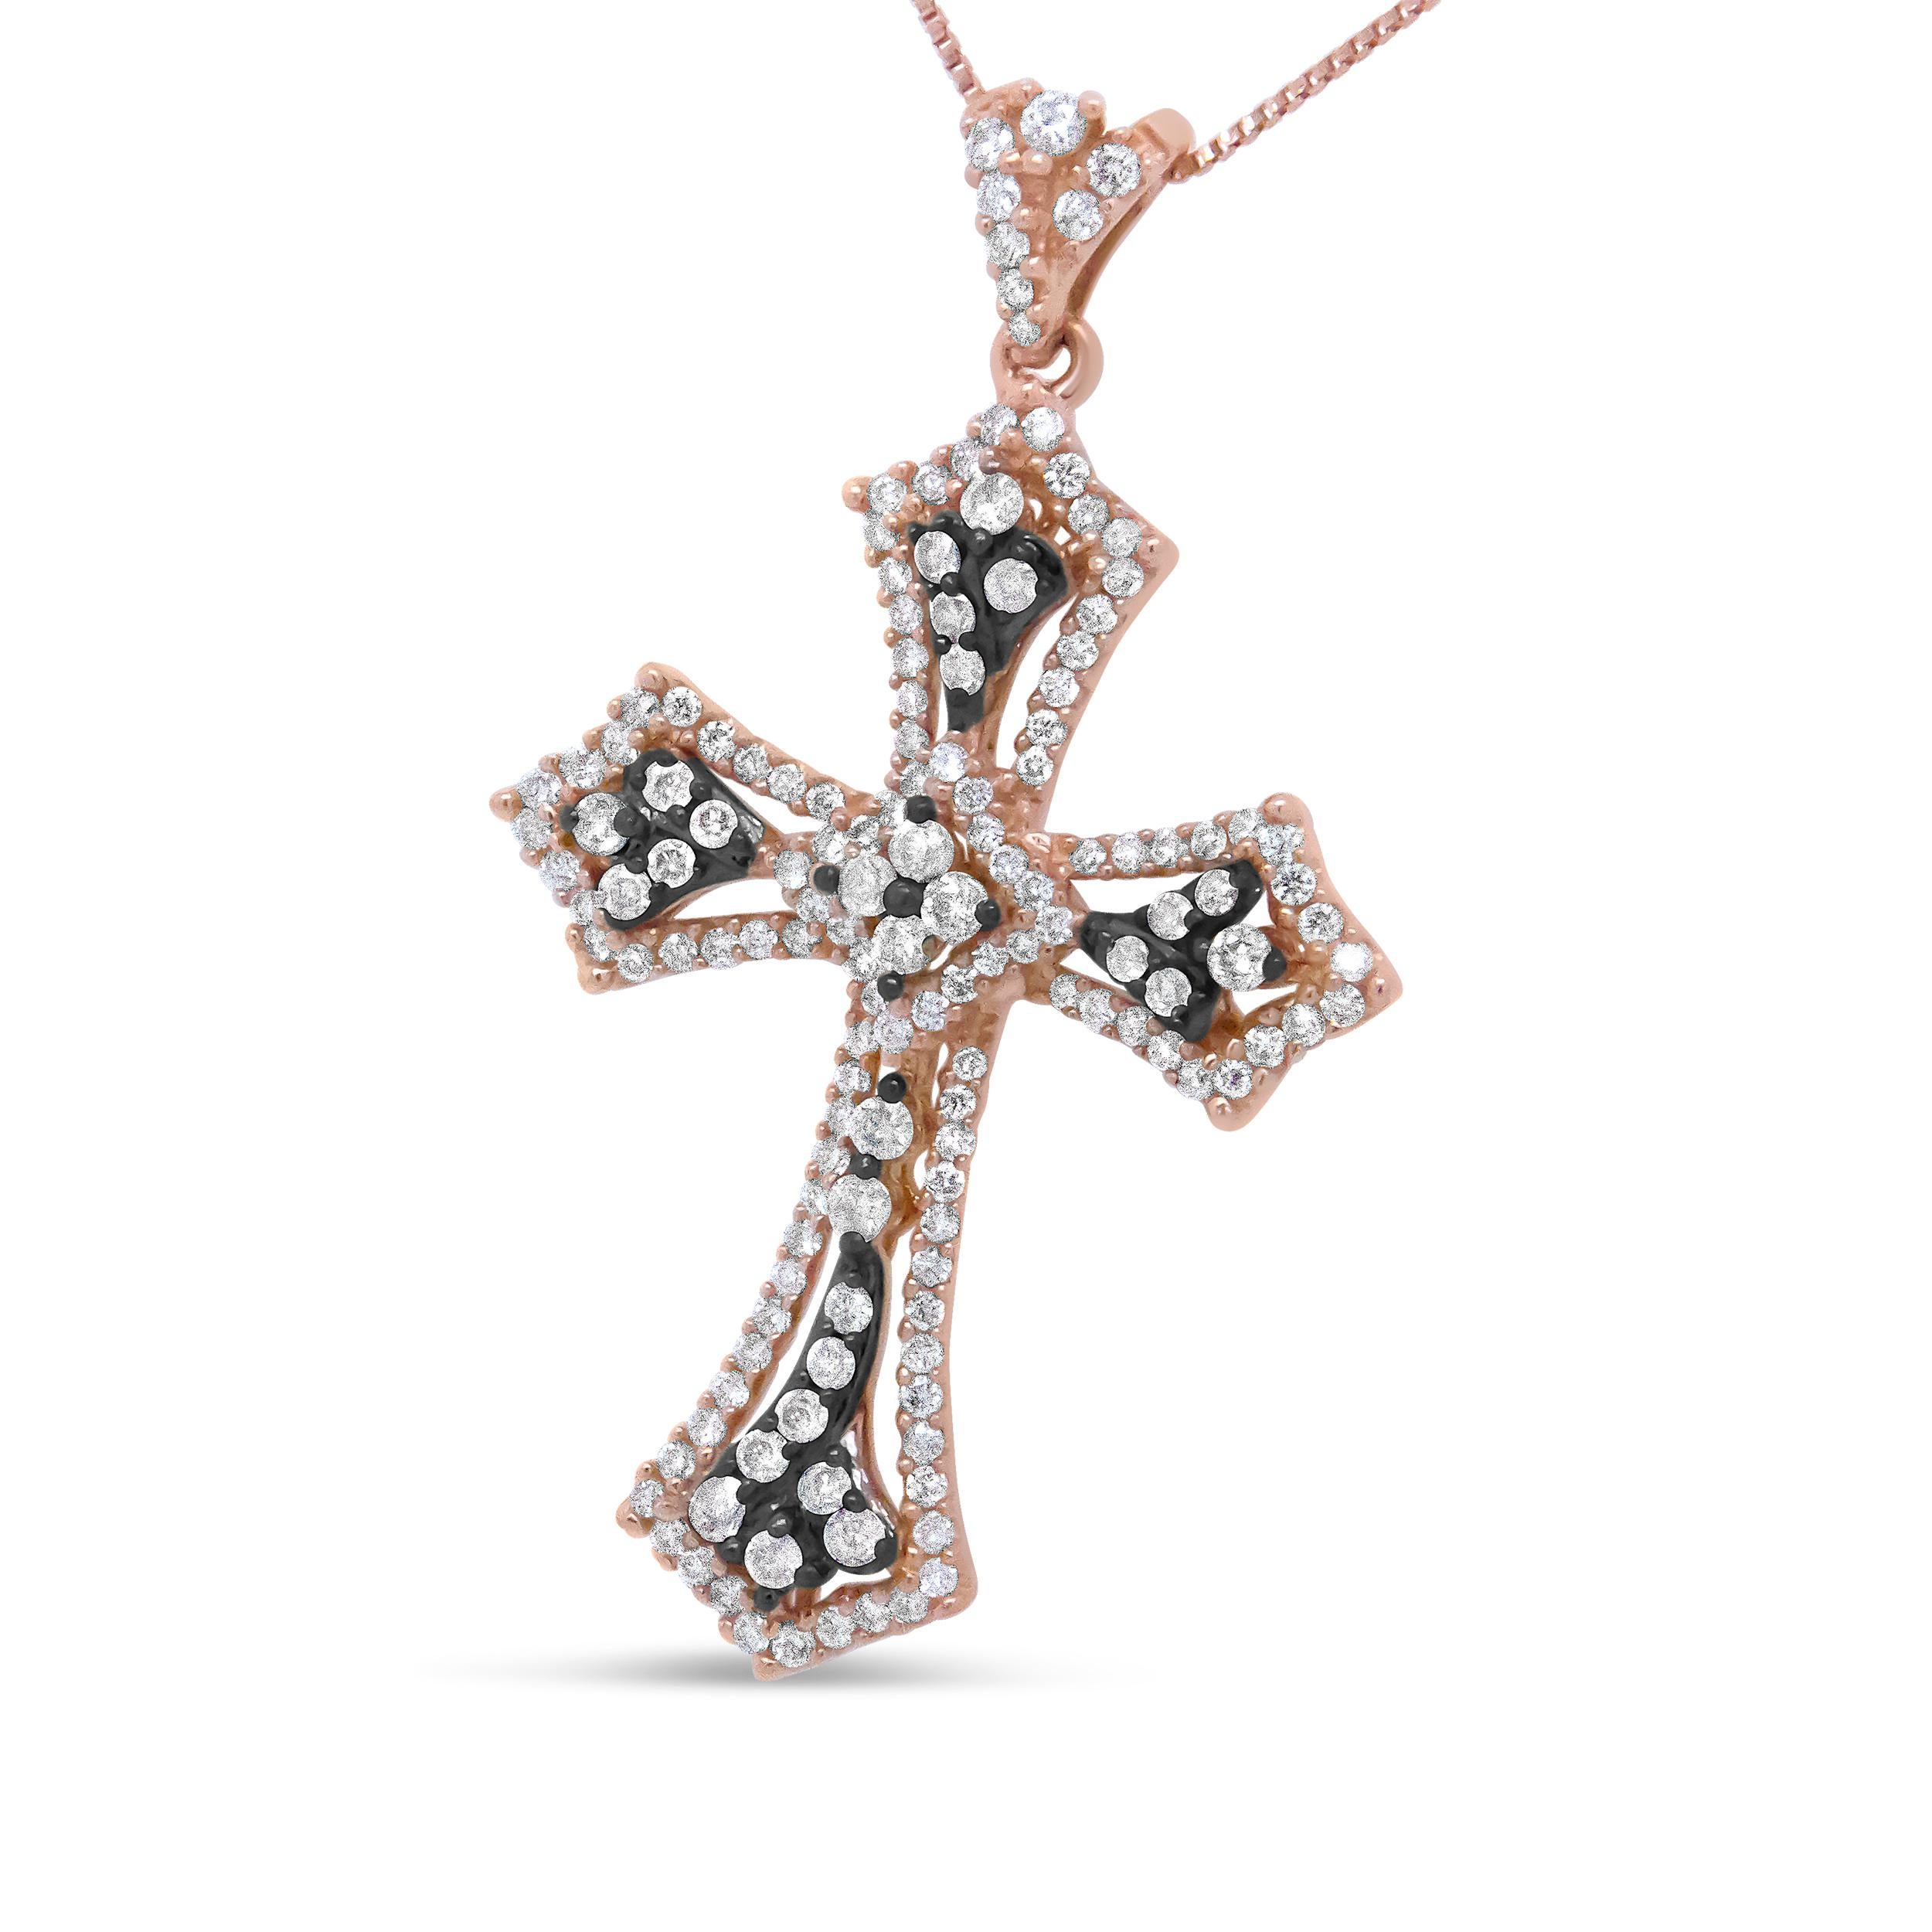 This diamond cluster cross pendant necklace is a crossover of tradition to modern with an edgy design twist that is an instant eye-catcher. The entire outline of this pendant glitters with round, prong-set diamonds, while the inner portion of the